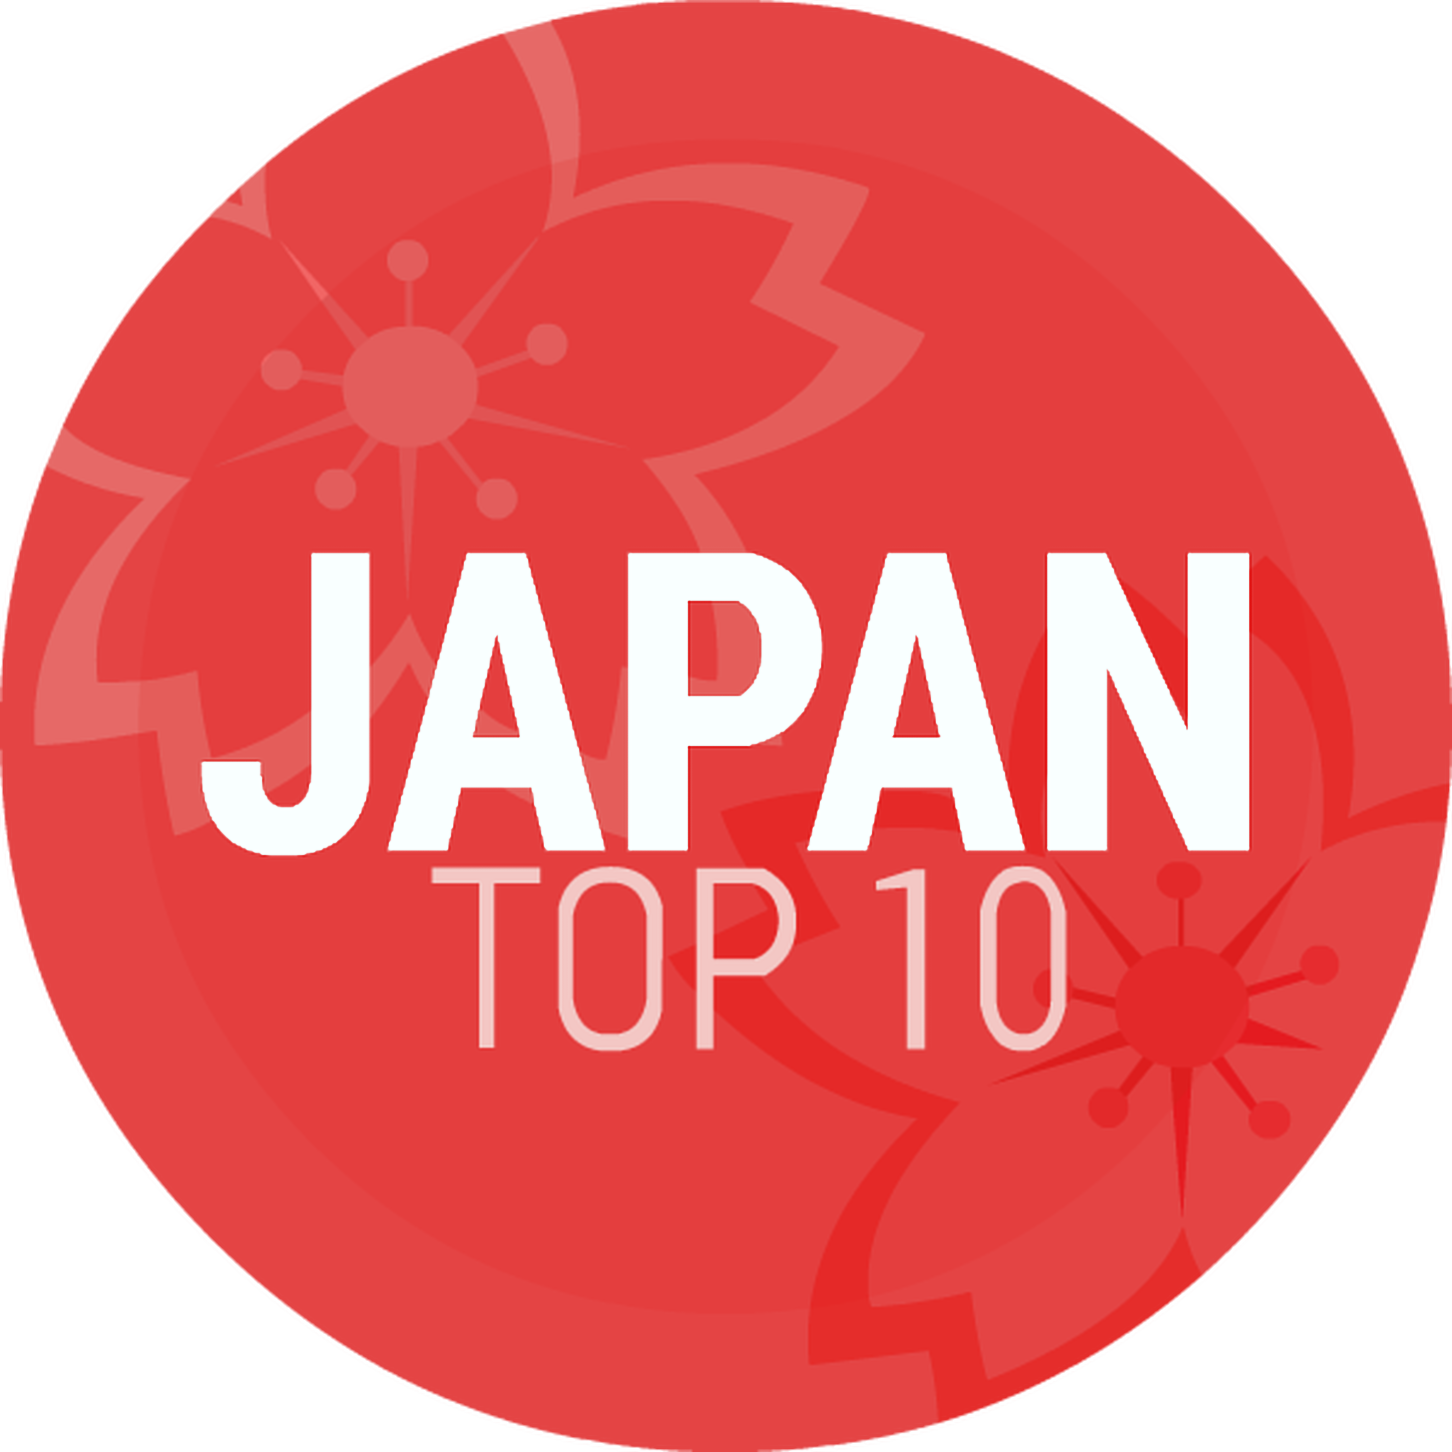 Episode 312: Japan Top 10 Cultures #9: Discover the City Pop Vibe